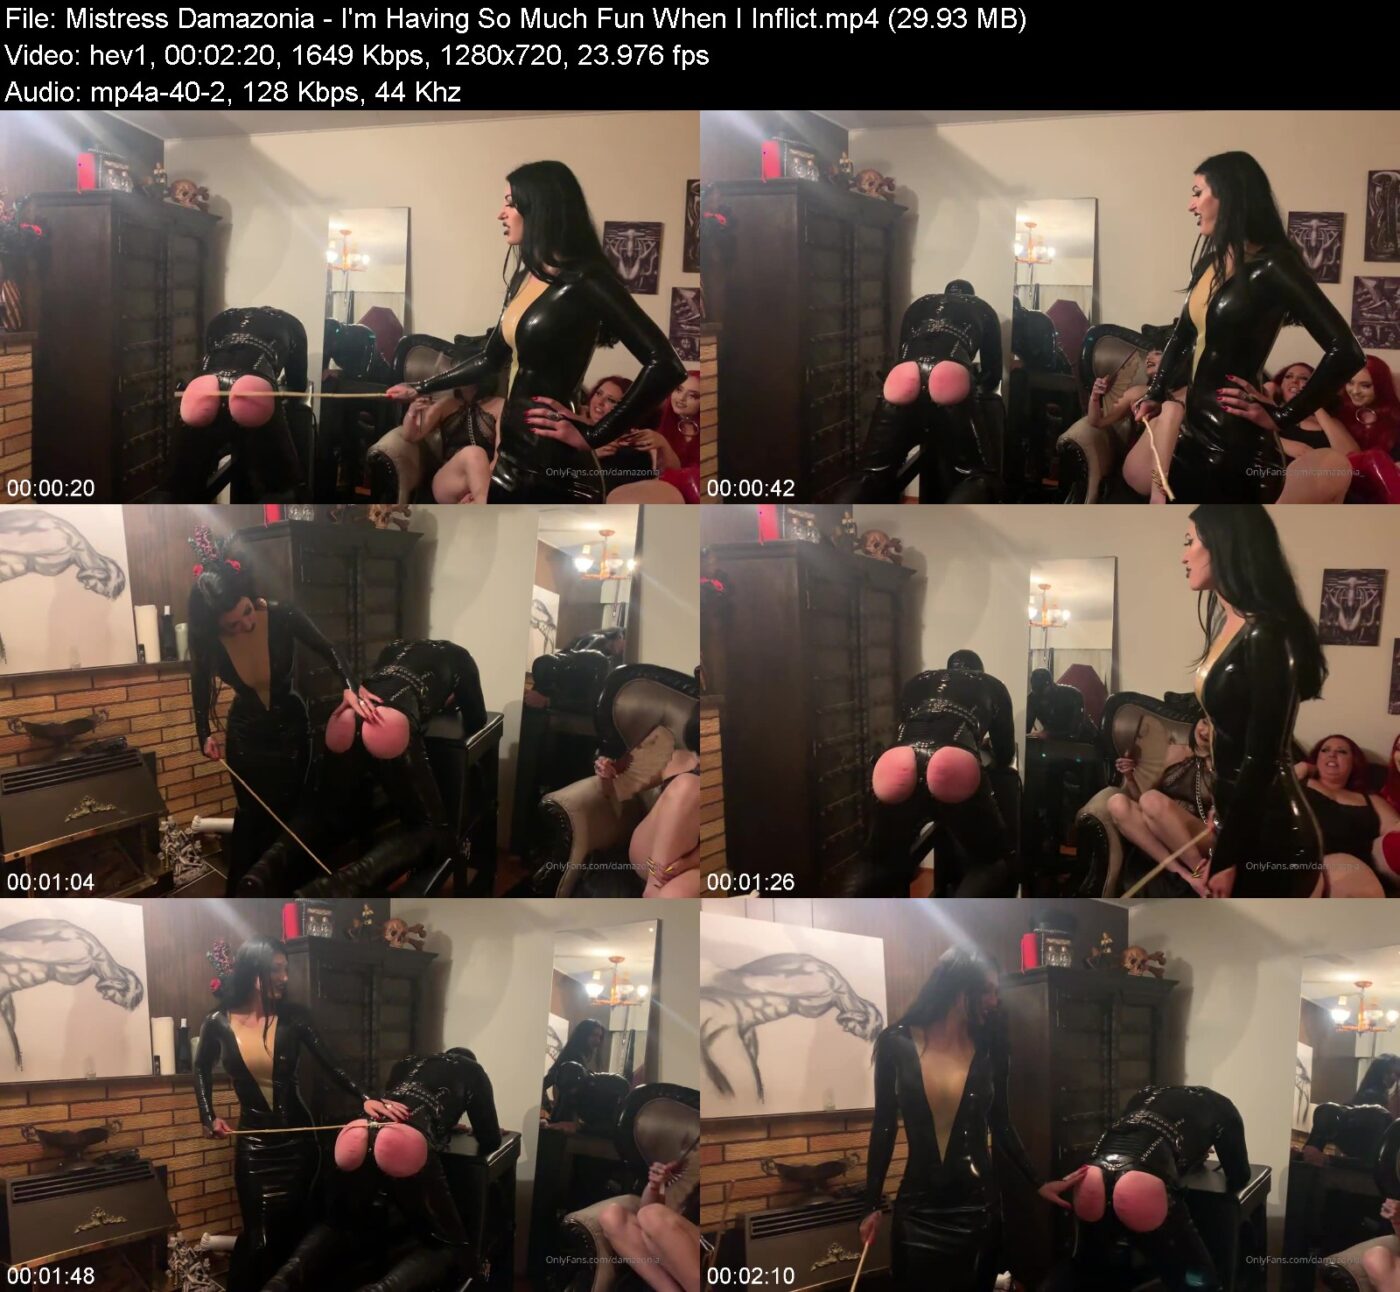 Mistress Damazonia in I'm Having So Much Fun When I Inflict